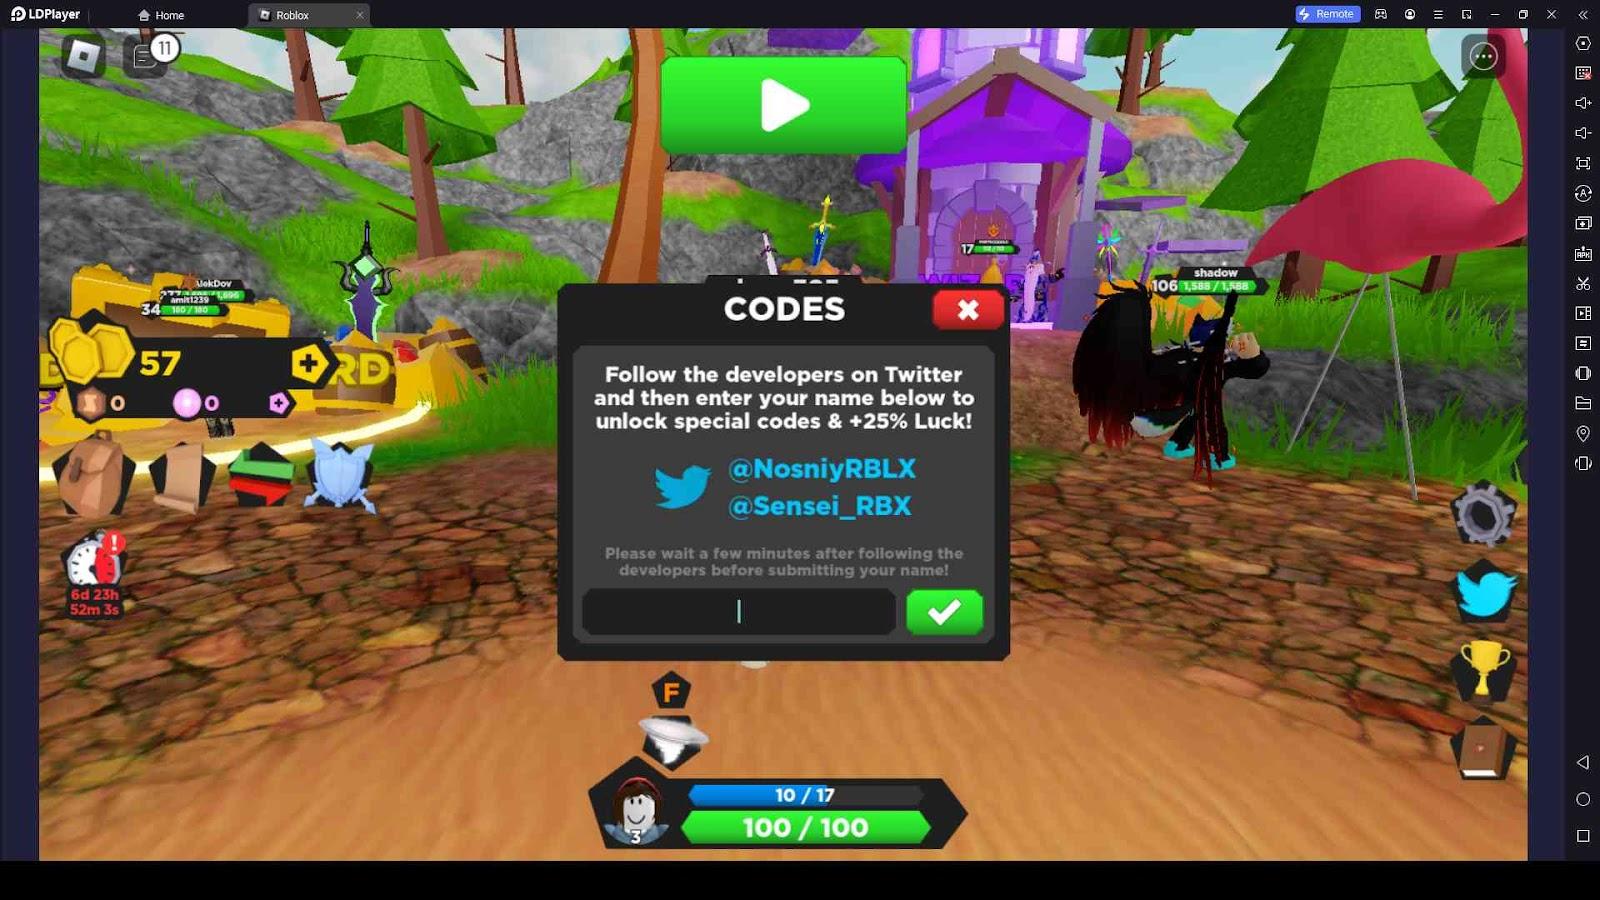 Roblox Sonic Speed Simulator Codes: Race to Supersonic Speeds